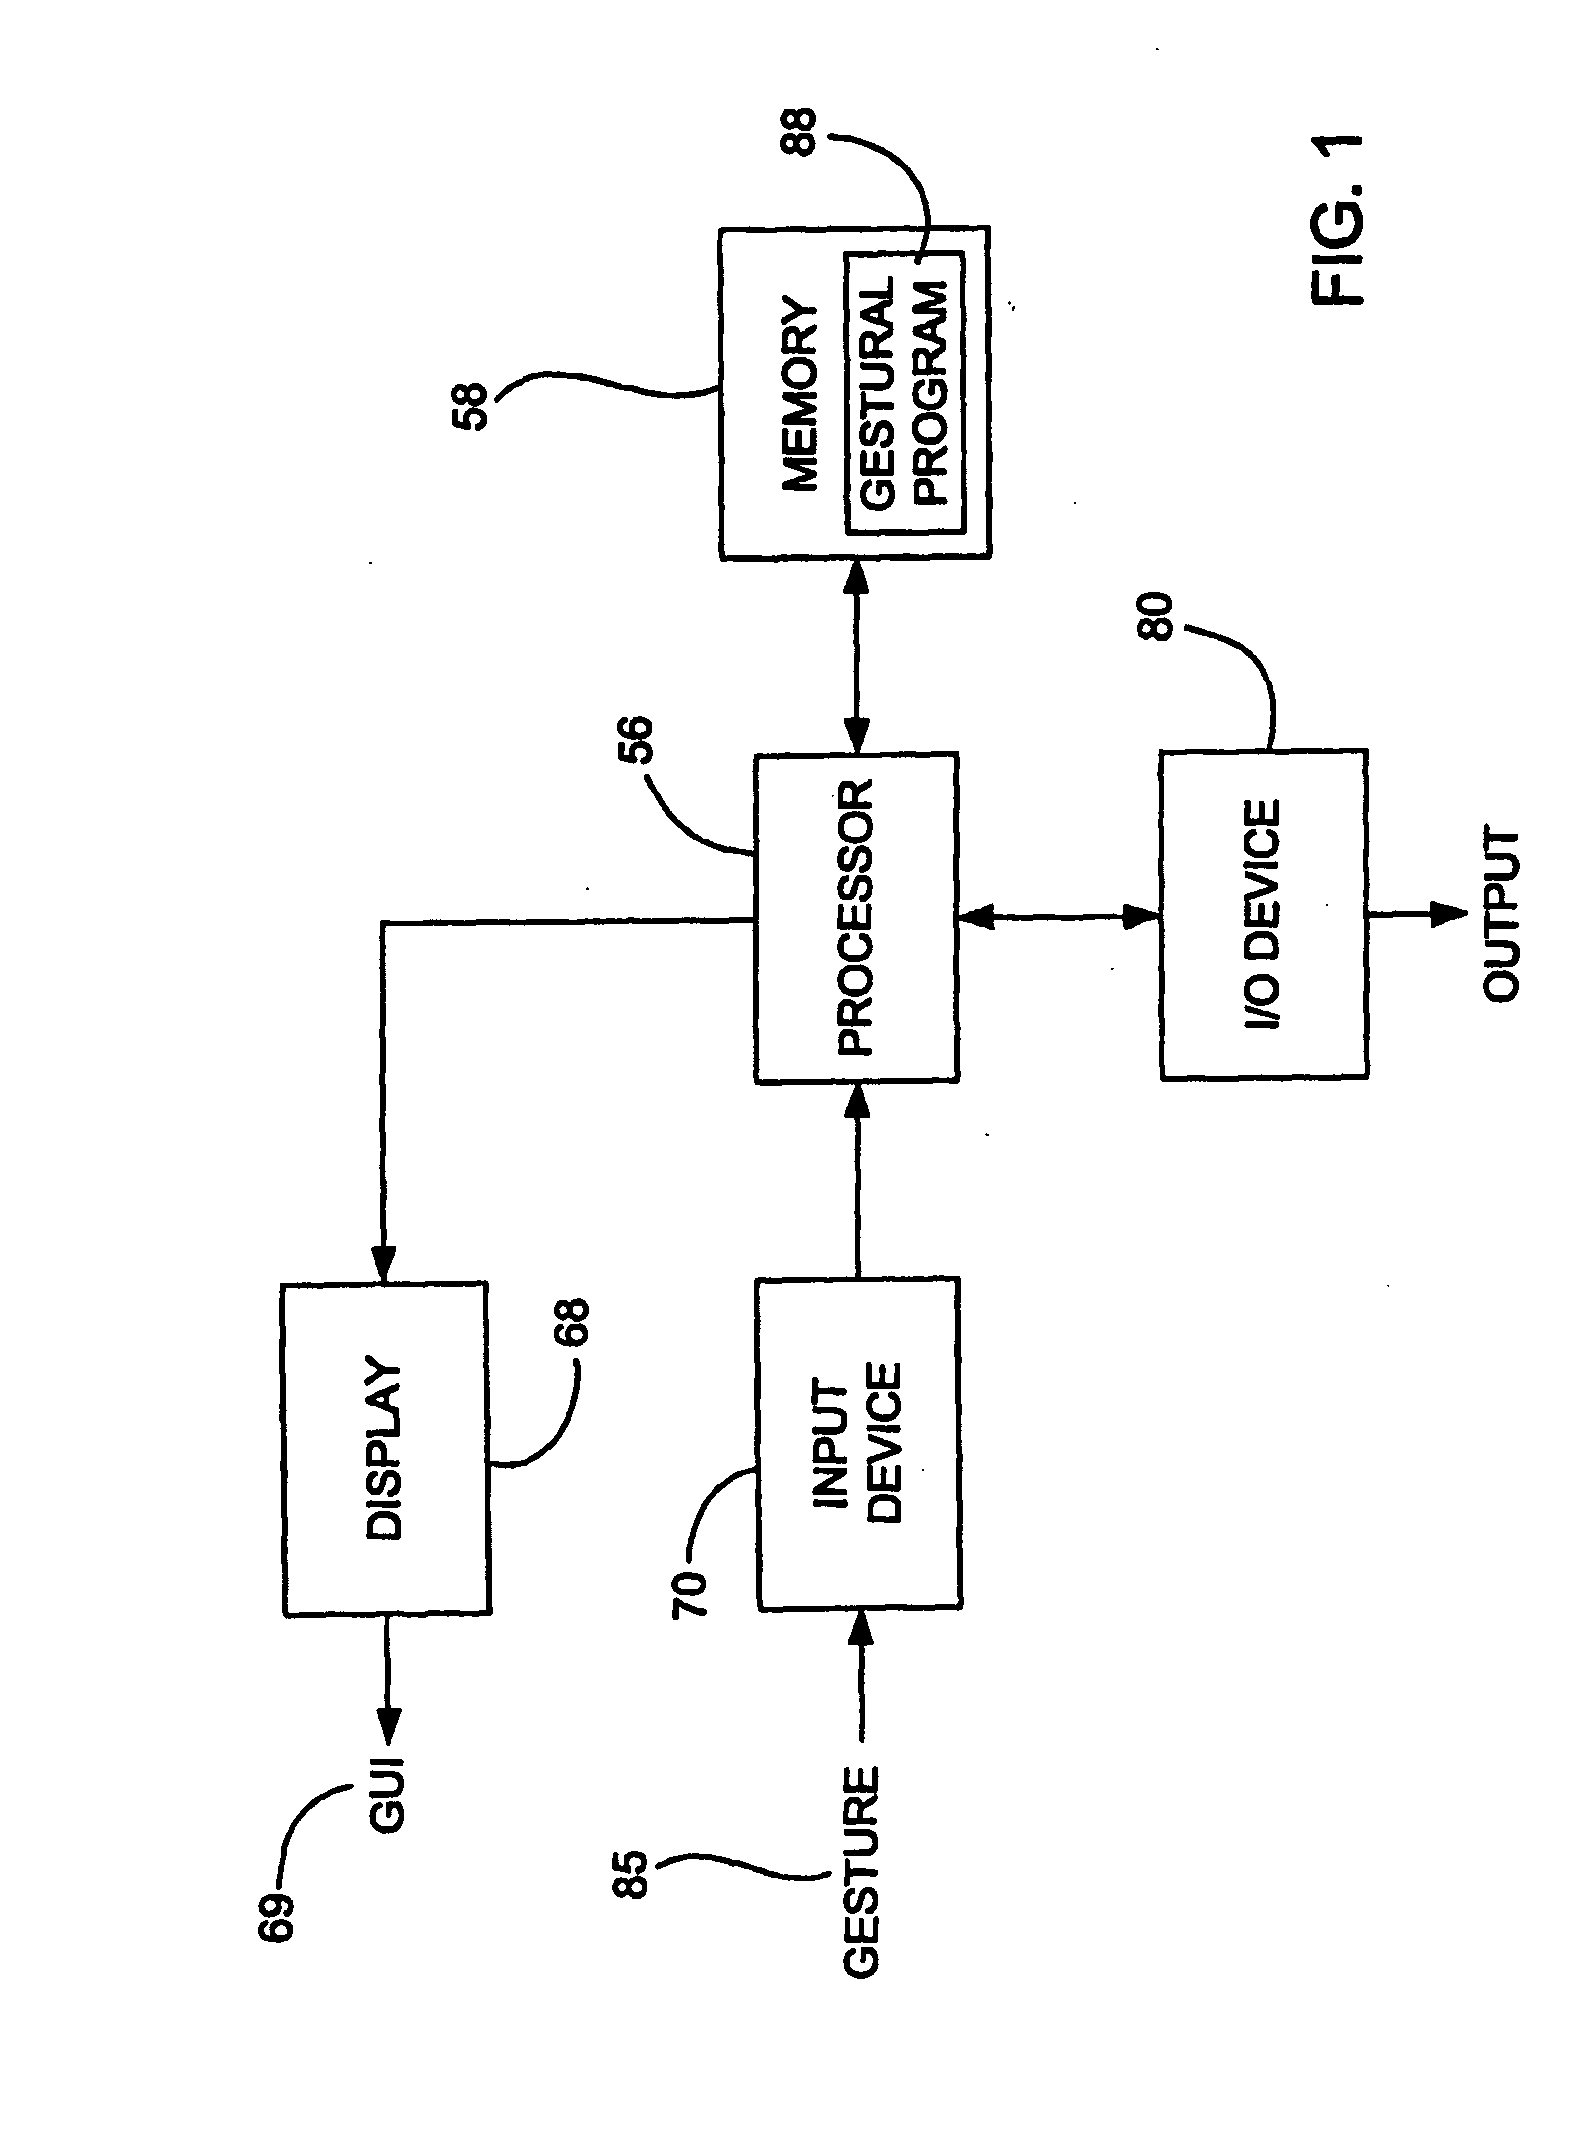 Mode-based graphical user interfaces for touch sensitive input devices